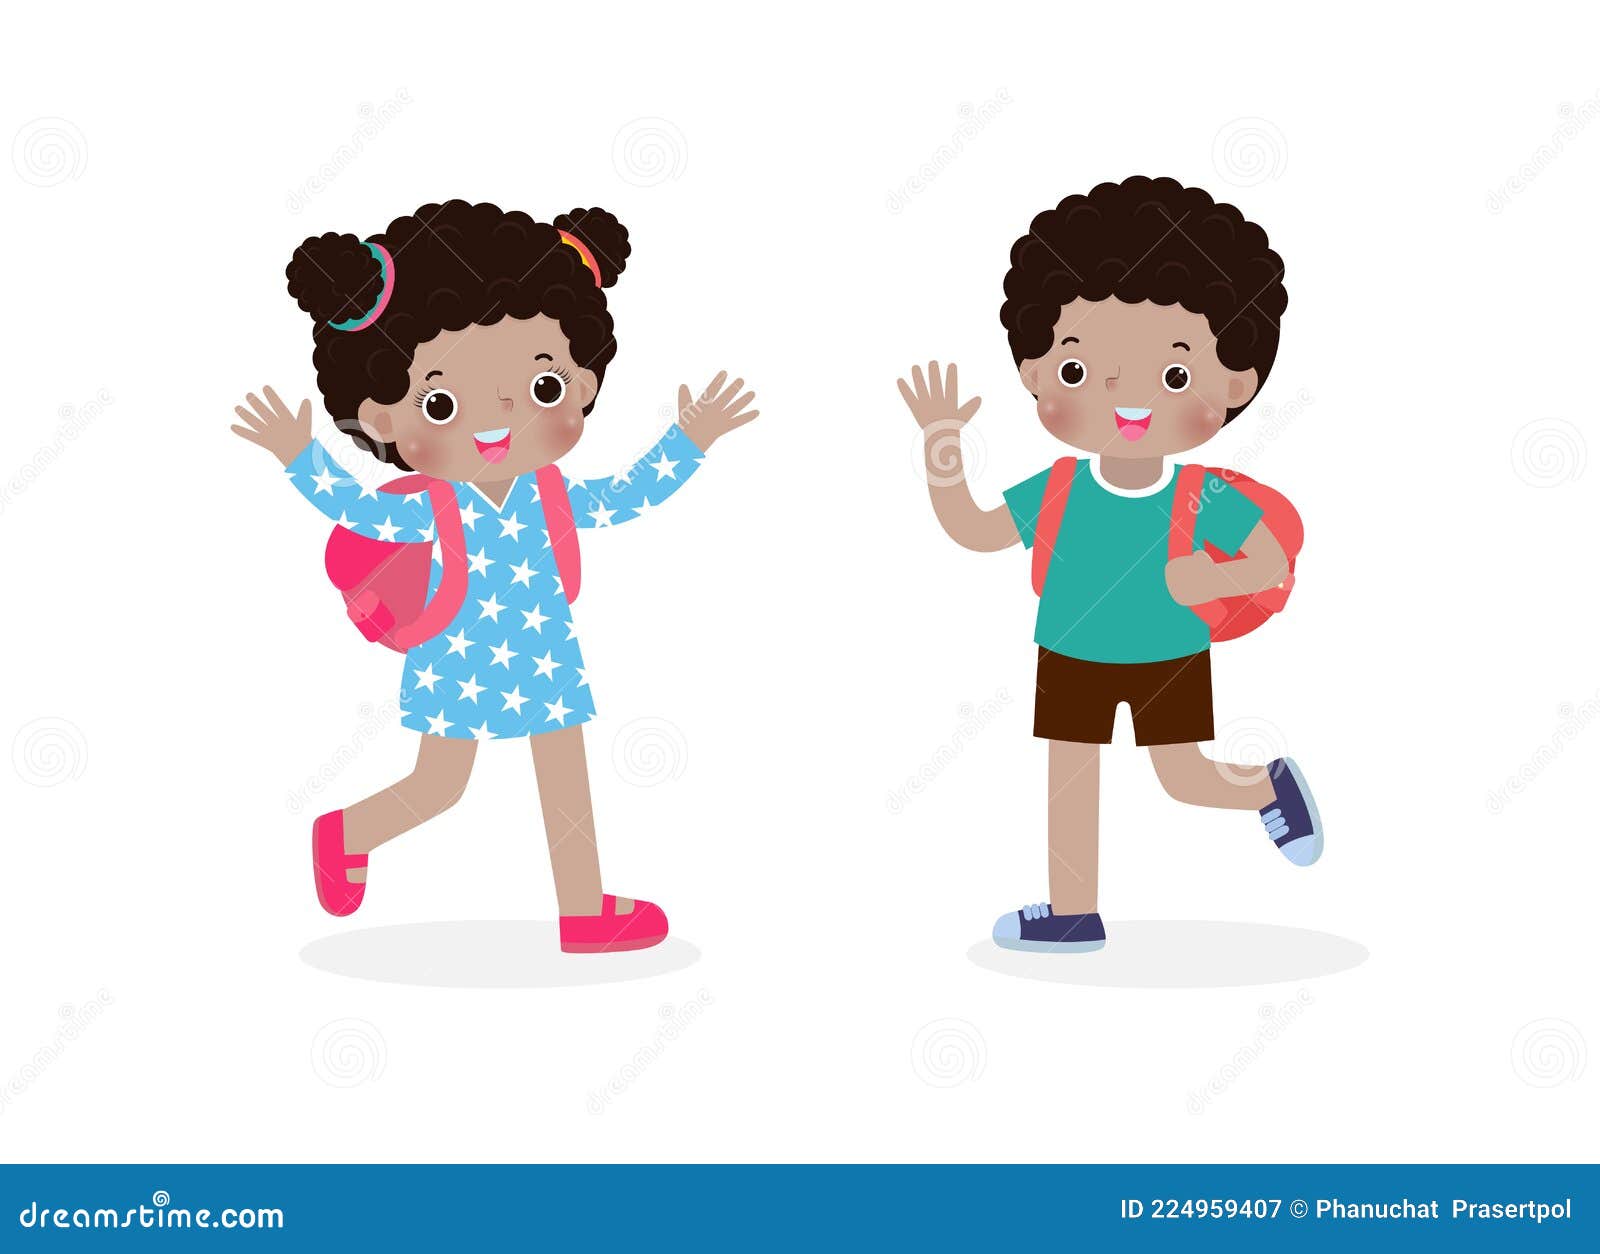 African American Children with the Backpack Saying Goodbye To Schoolmates Cartoon  Characters Boy and Girl School Kids Stock Illustration - Illustration of  character, girl: 224959407